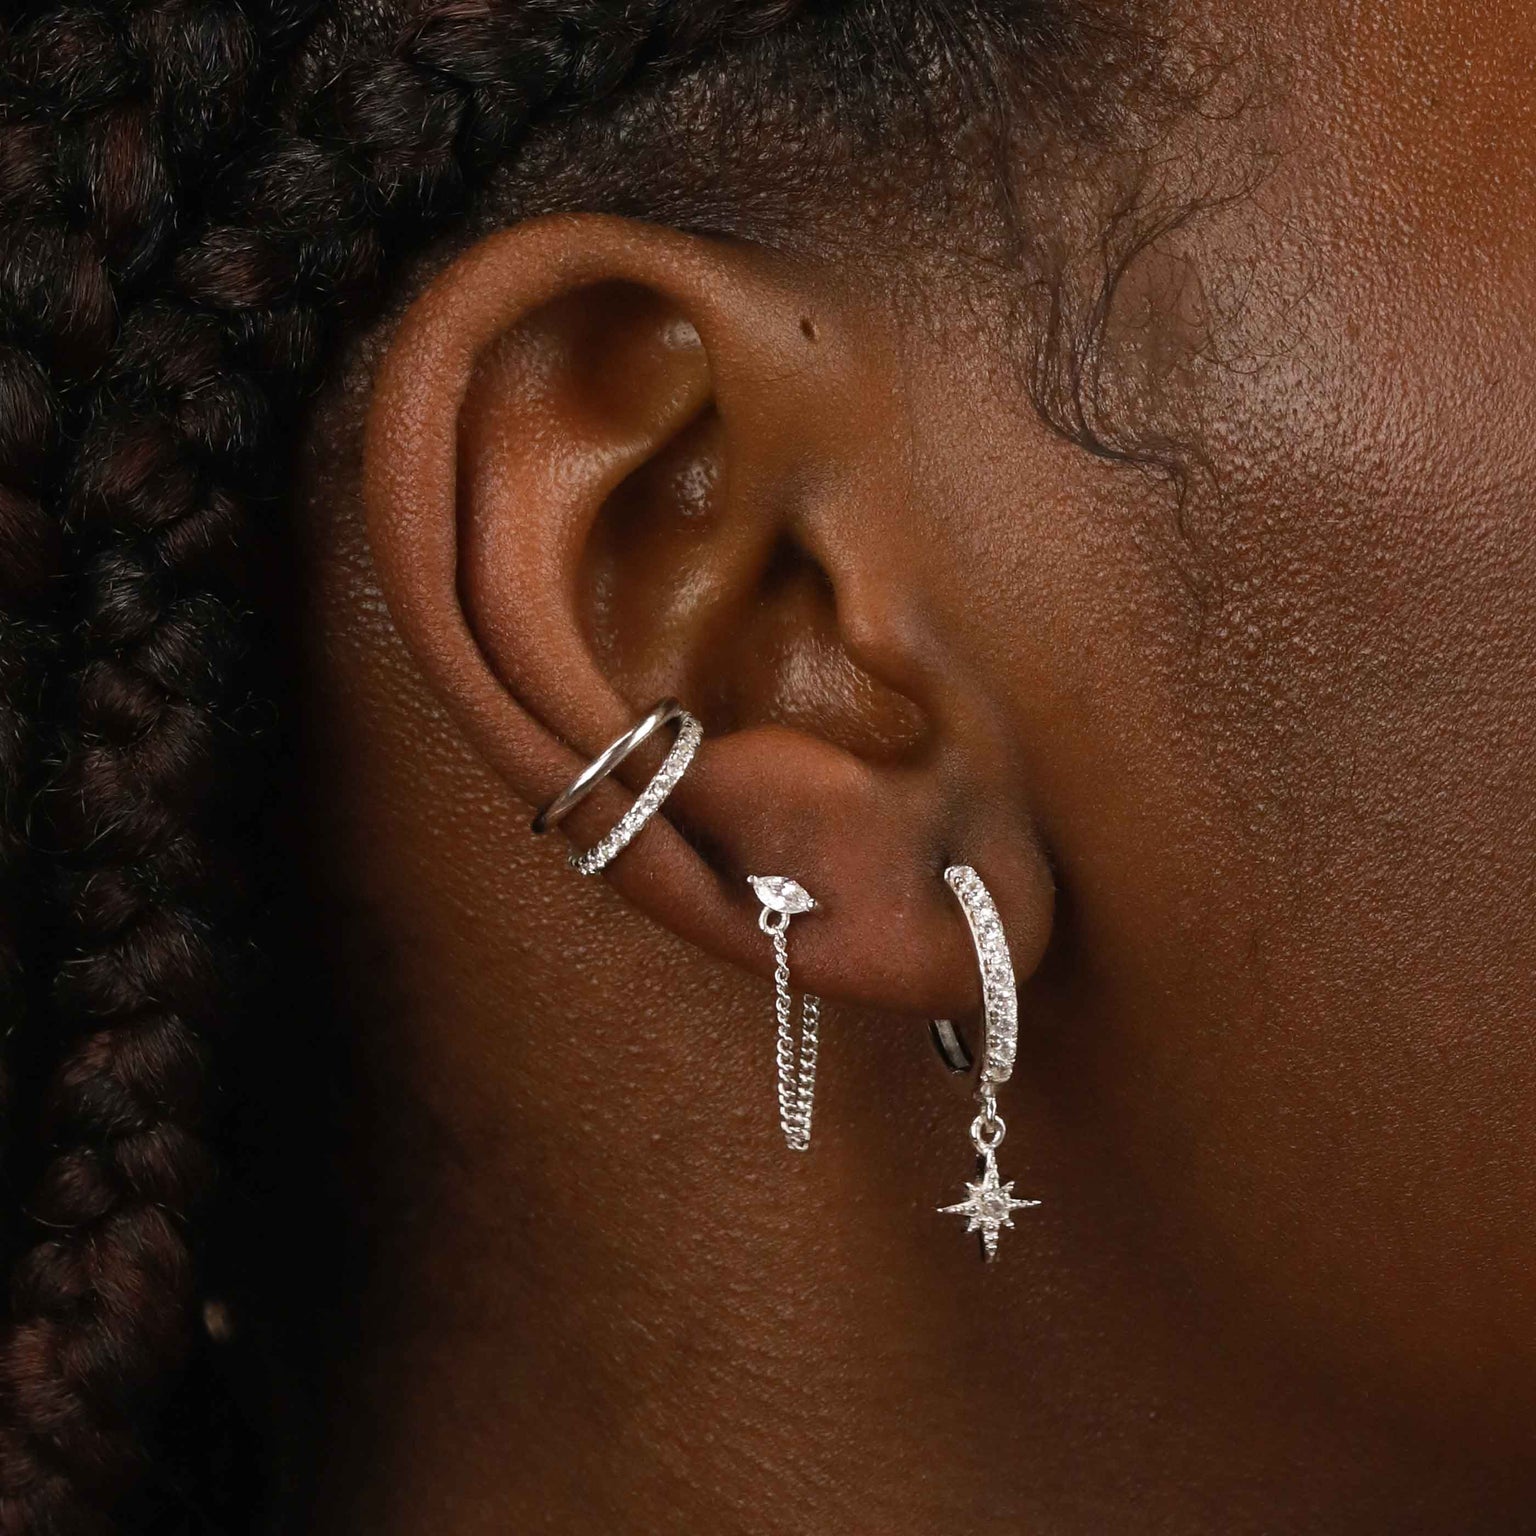 Crystal Star Hoops in Silver worn with other earrings